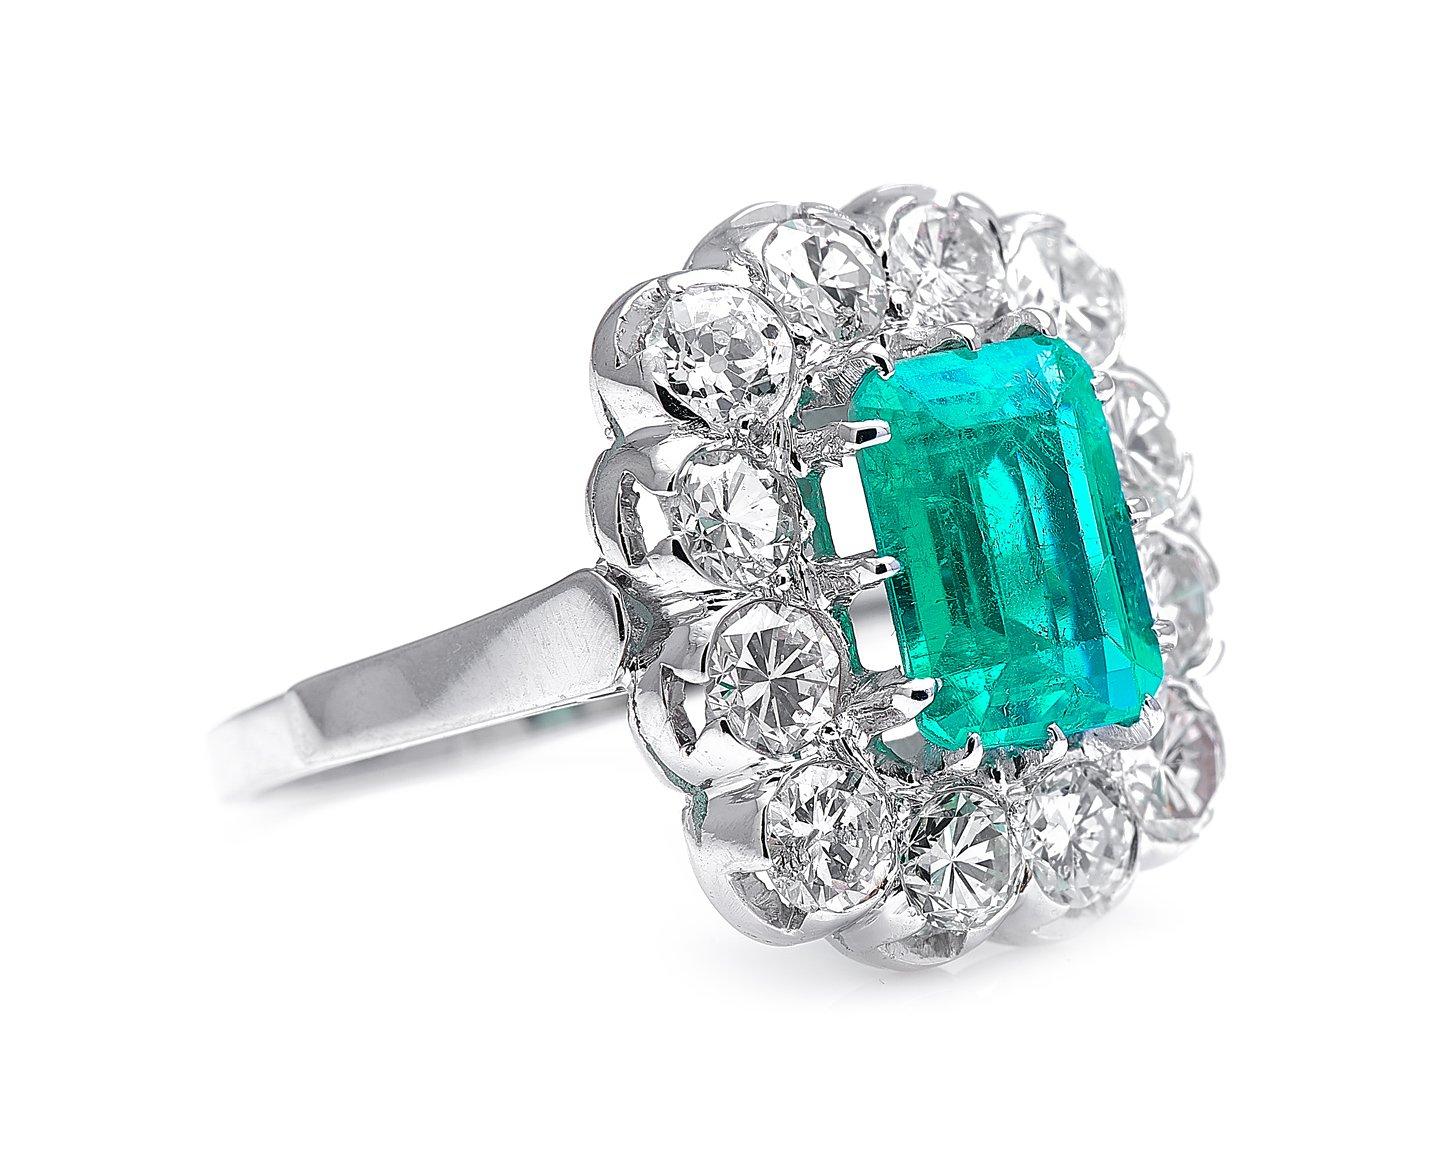 Emerald and diamond ring, mid 20th century. This mid-century cluster ring is set with a step-cut Colombian emerald weighing approximately 1.6 carats, in an attractive, slightly bluish green shade with excellent transparency. Colombia has